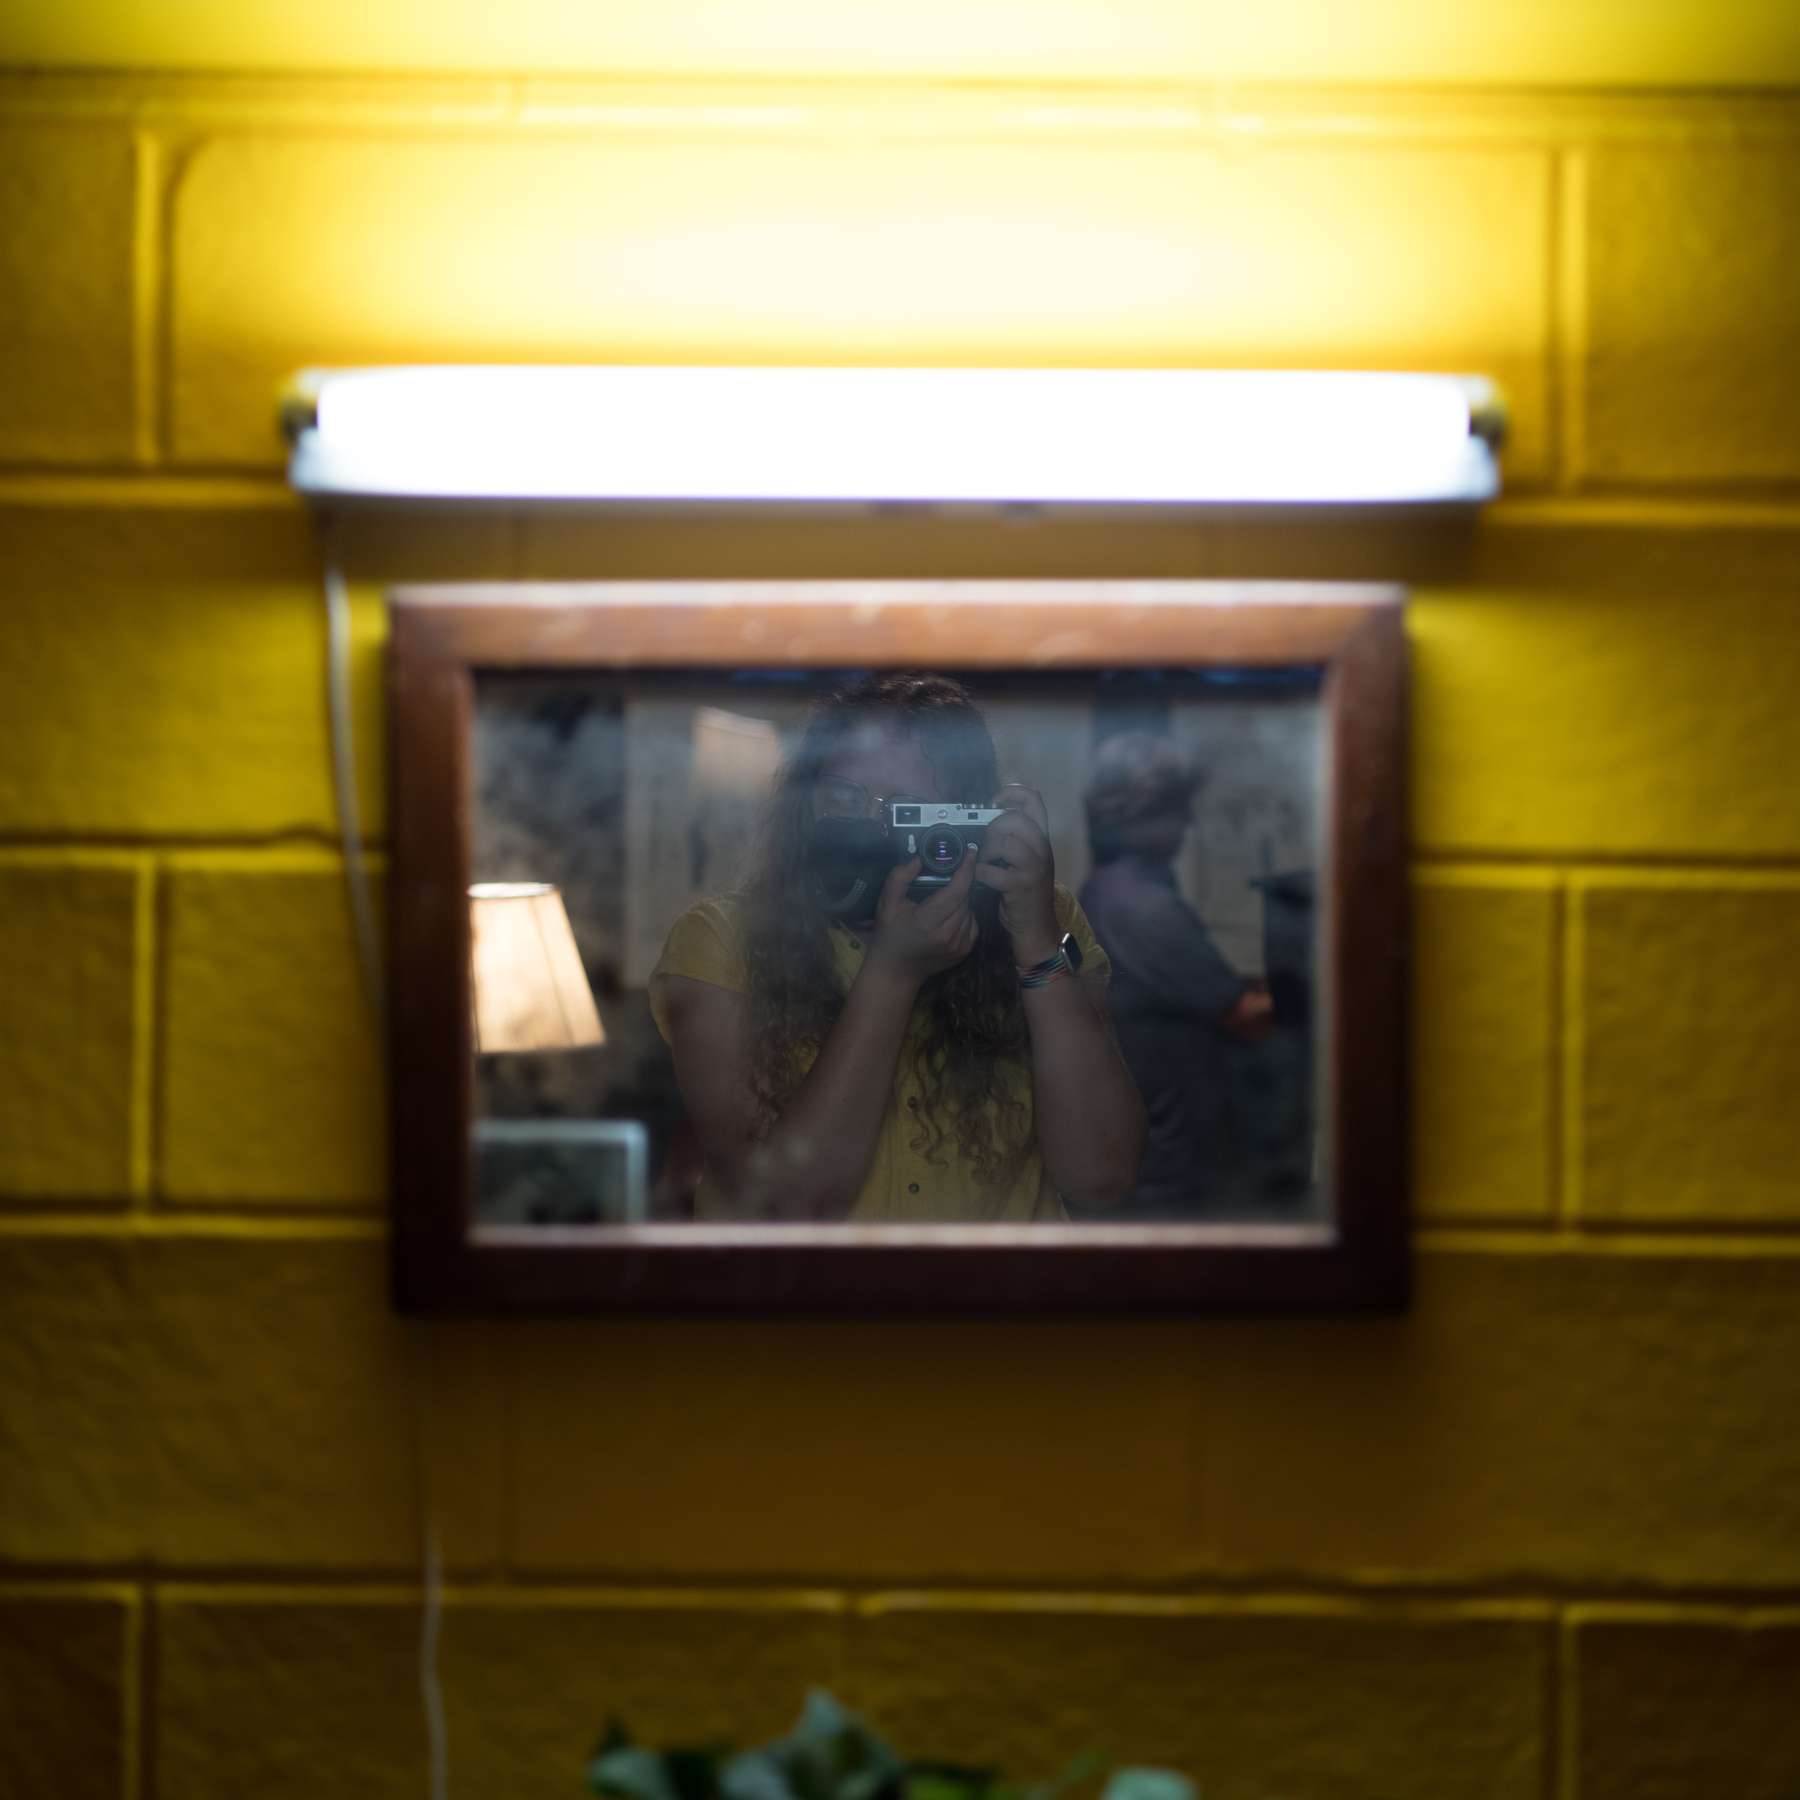 A yellow brick wall is adorned with a small dirty mirror and above it sits a bright tube light. In the mirror you can see a girl in a yellow shirt taking a photo directly into the mirror.